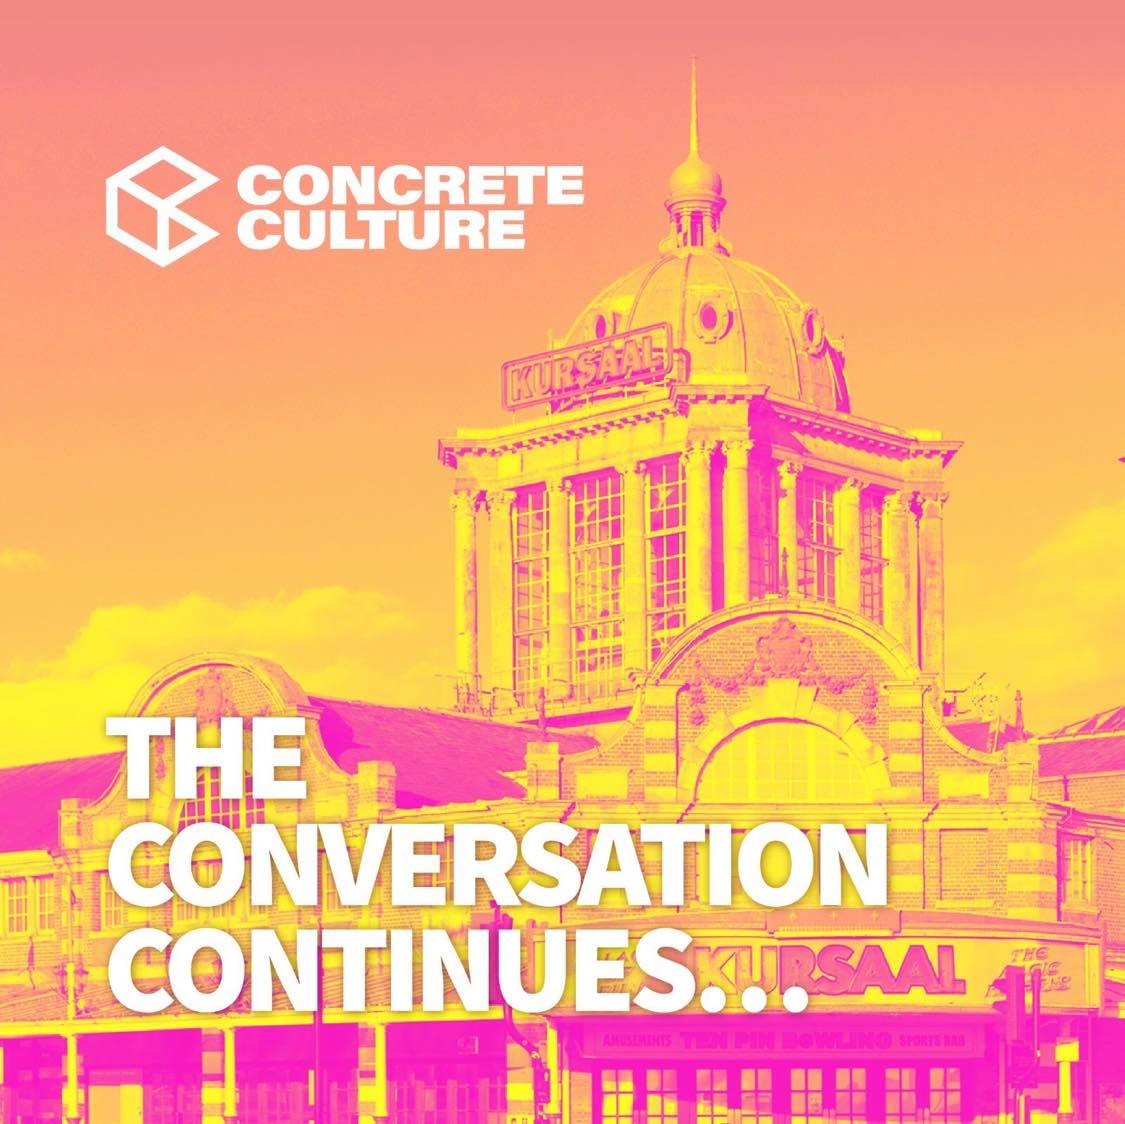 CONCRETE CULTURE AND THE FUTURE OF THE KURSAALLast night I was honoured and delighted to join a Zoom call organised by  @ConcreteSX , a new community arts collective in the town, around ideas of how to bring the Kursaal back into use as a community and arts hub.